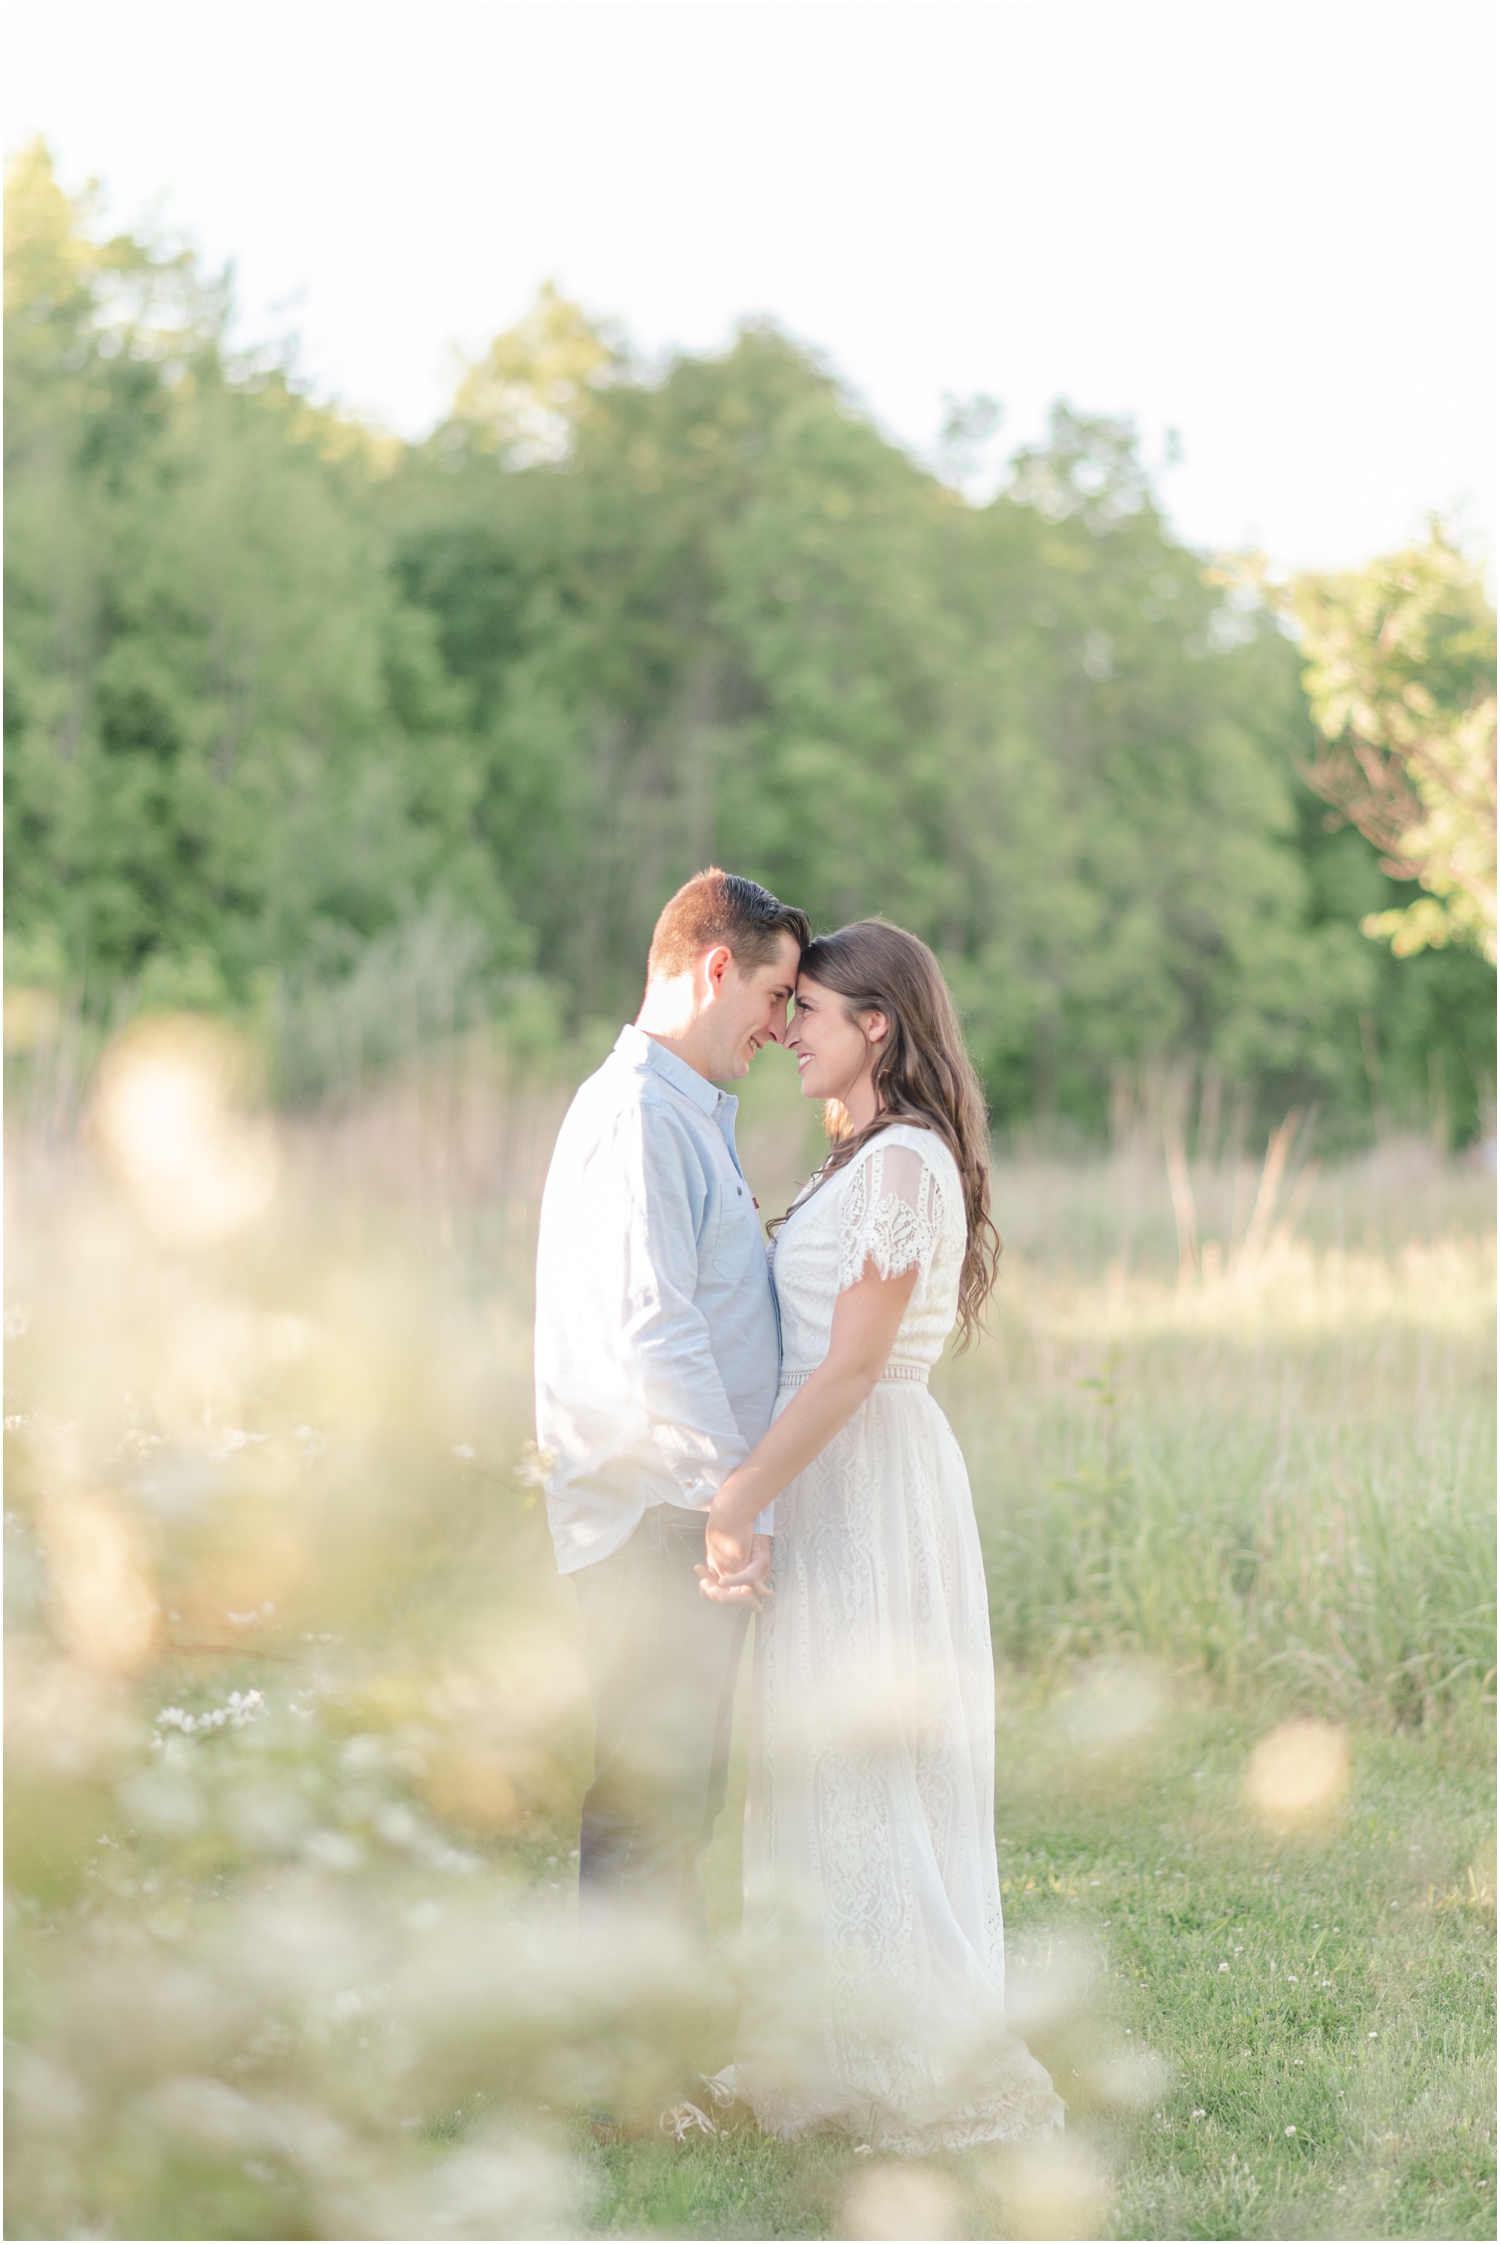 Wedding Photographer Prices and Packages Matea Park Sunset Engagement Photos Indiana Wedding Rose Courts Photography